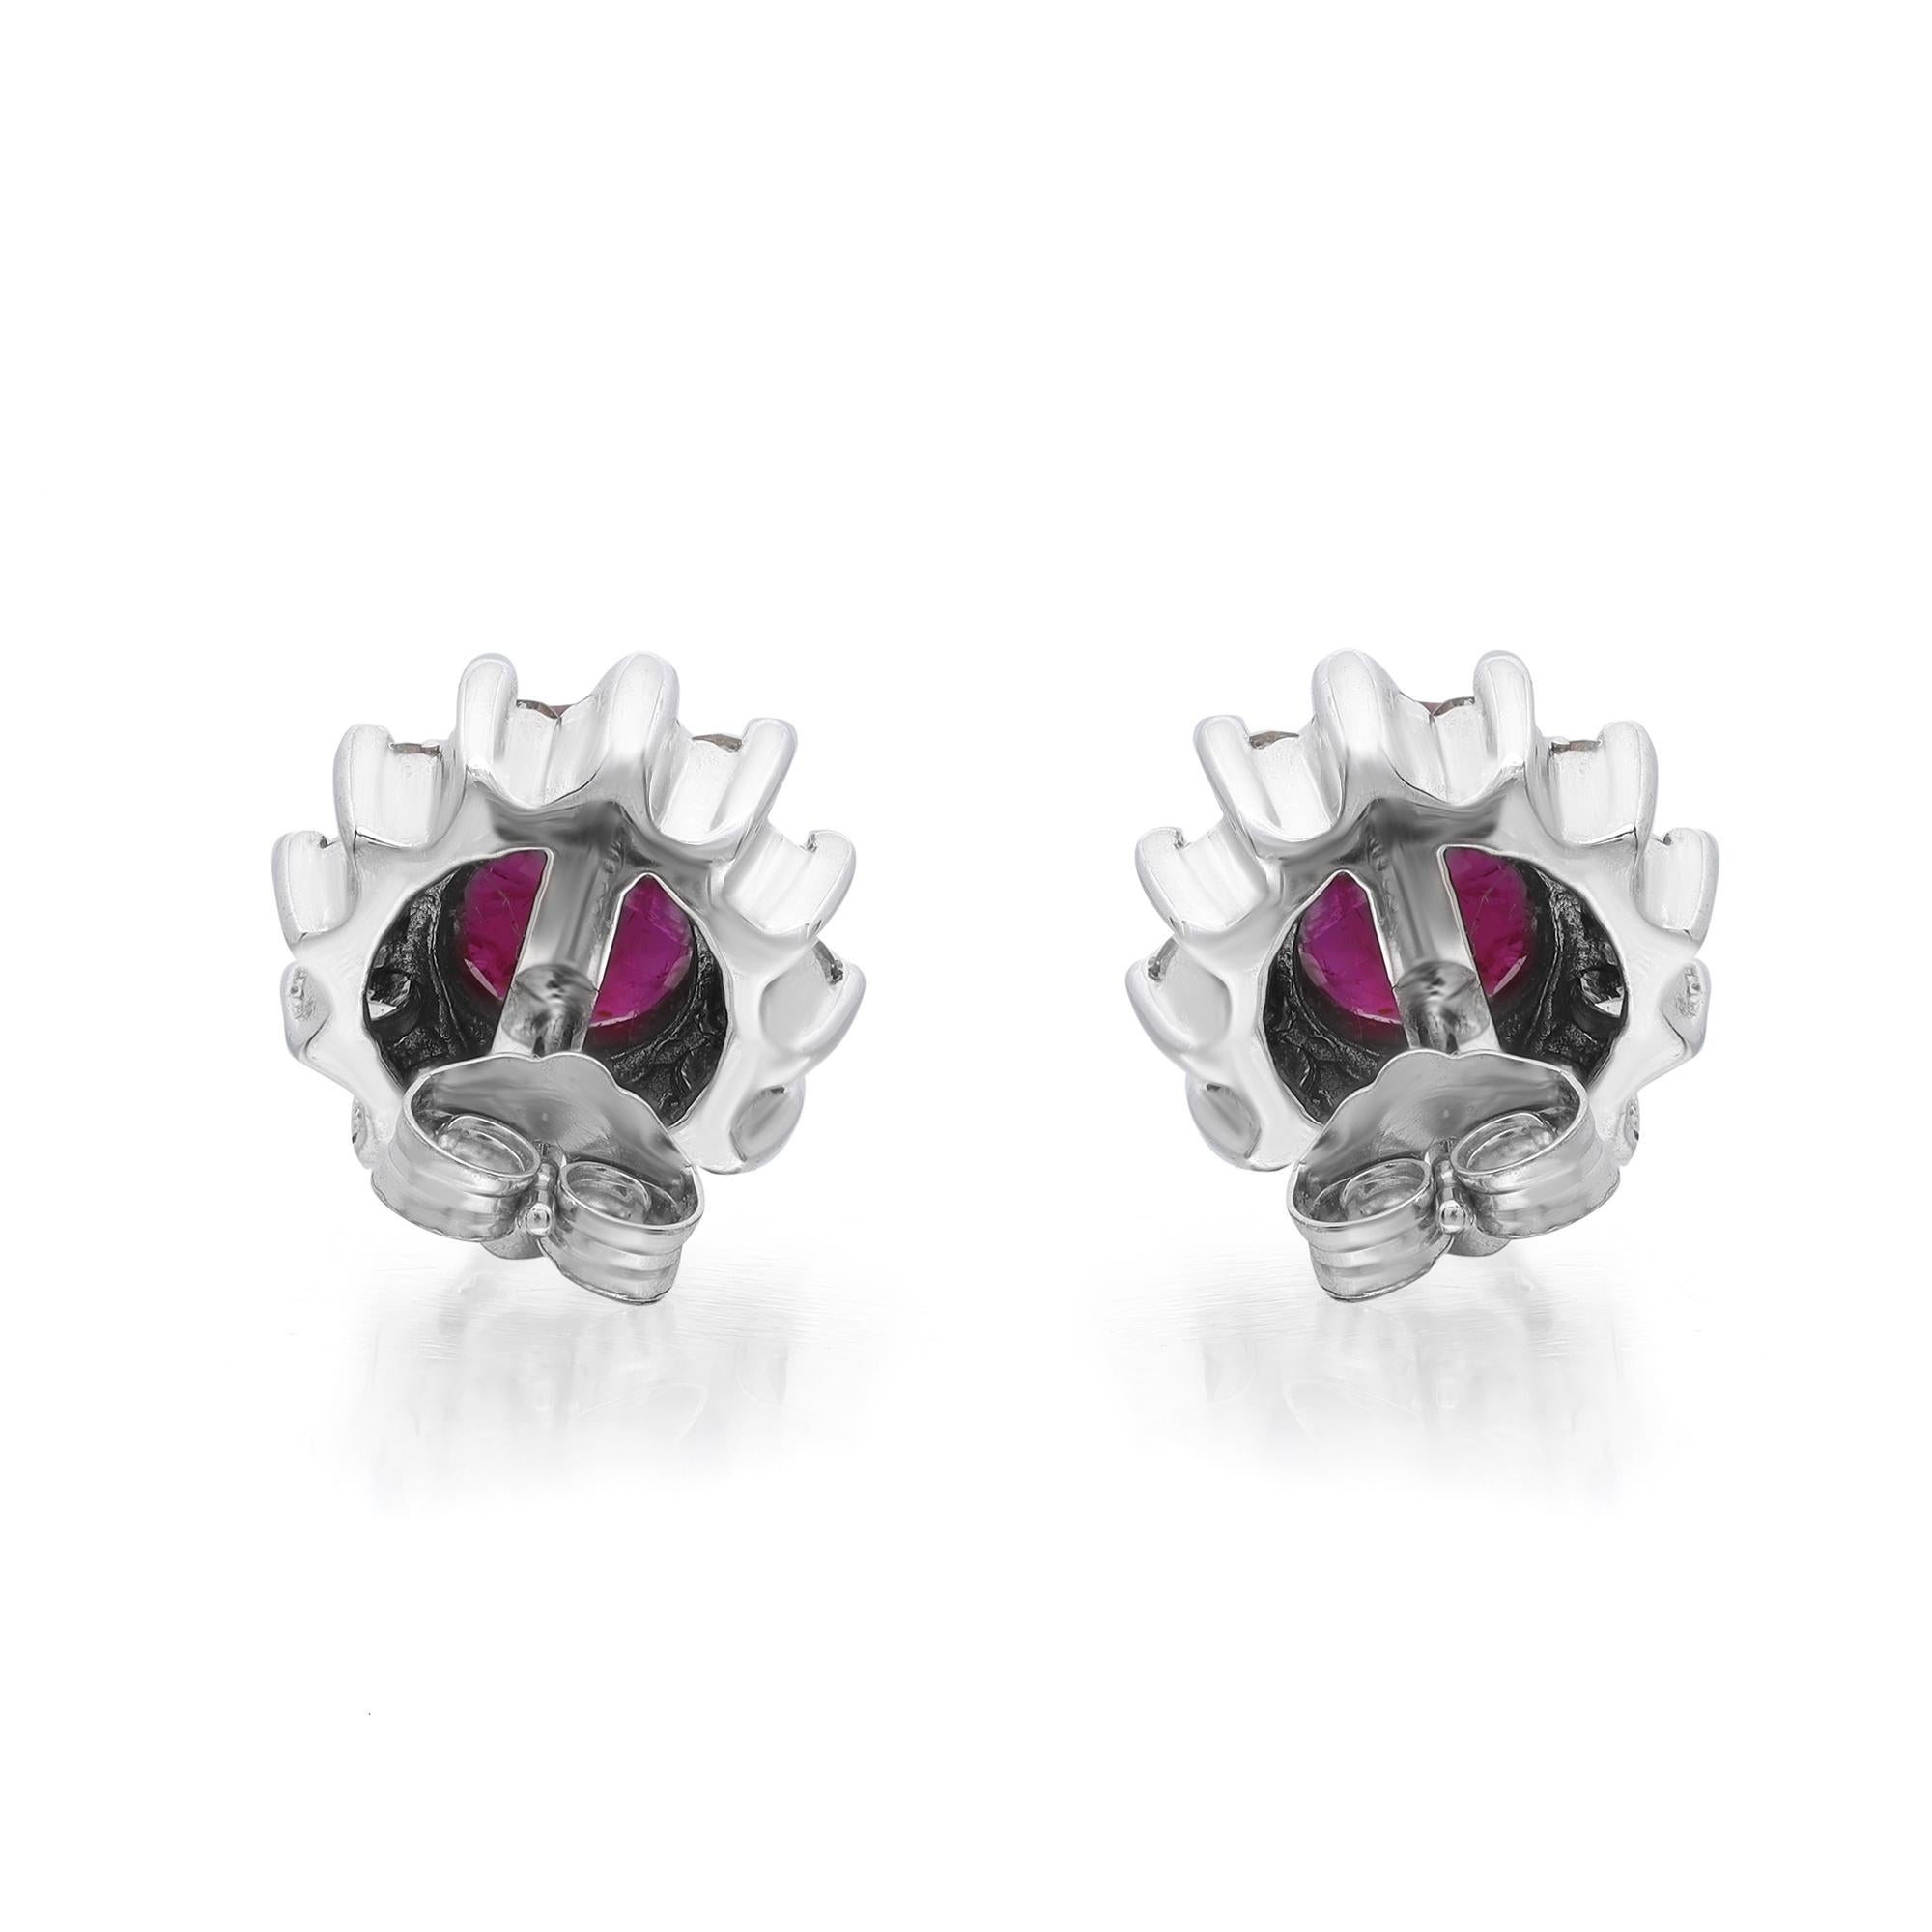 These stunning Ruby and diamond stud earrings are crafted in 14k white gold. Showcases prong set oval shape Rubies weighing 2.88 carats with round brilliant cut diamonds weighing 0.72 carat in halo setting. Diamond quality: color M-N and clarity SI.